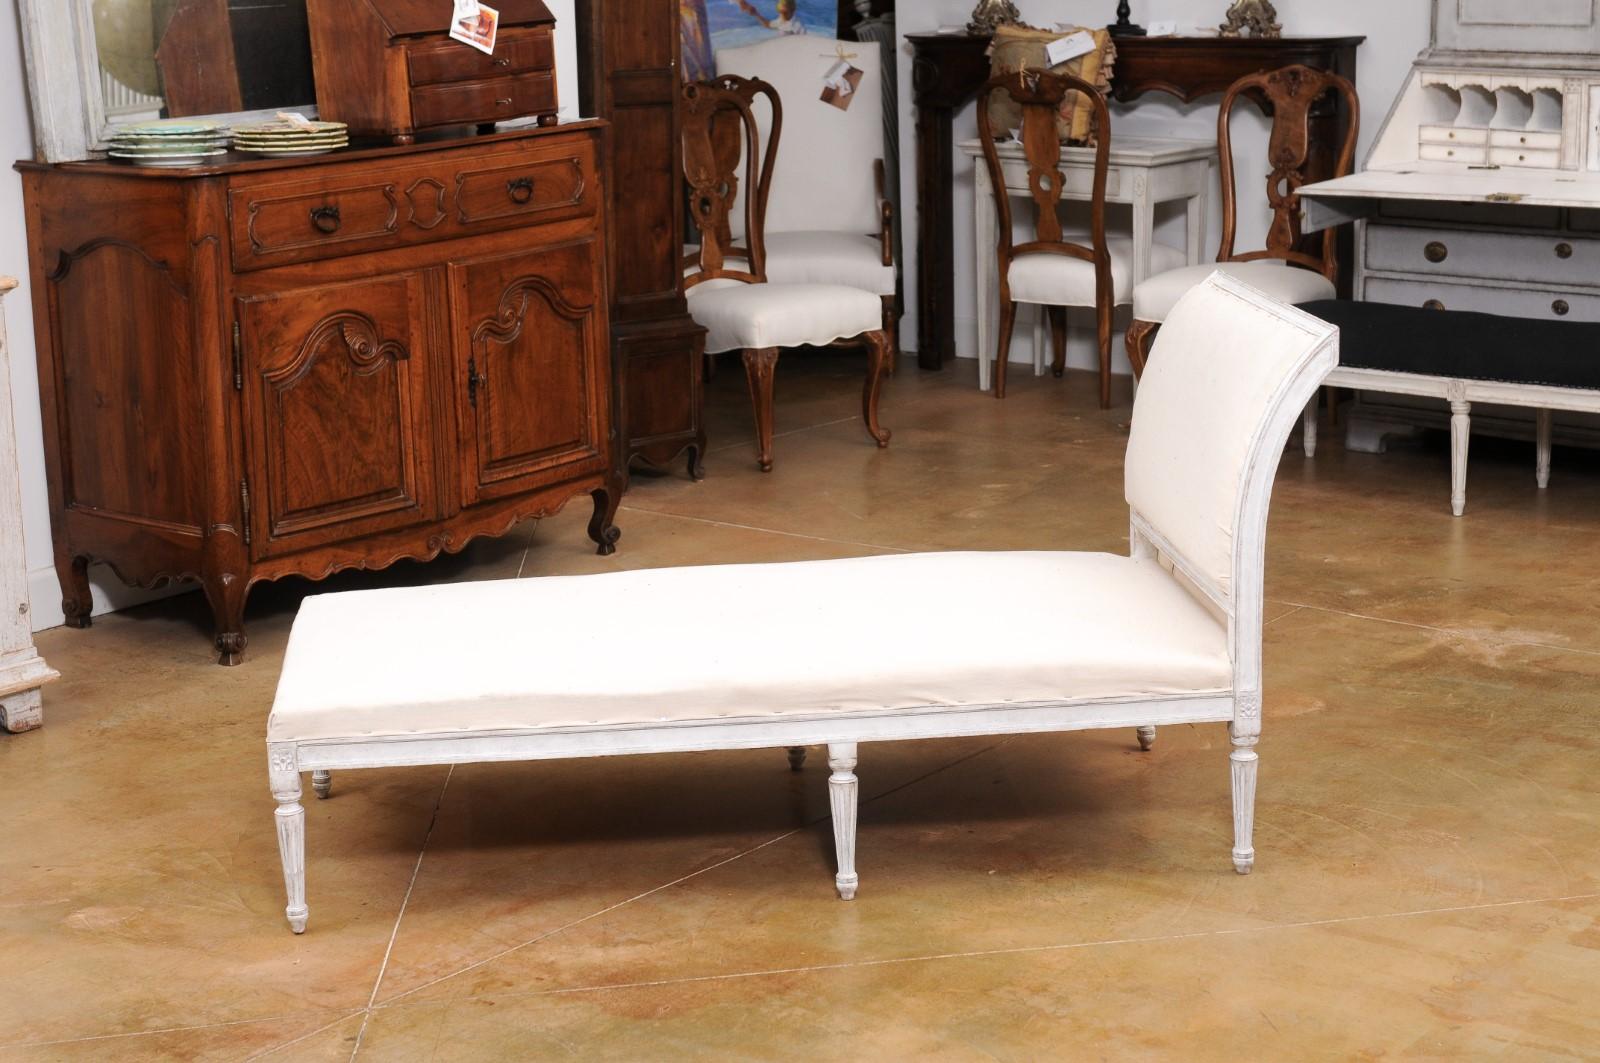 European Neoclassical 1830s Painted Daybed with Carved Rosettes and Fluted Legs For Sale 1